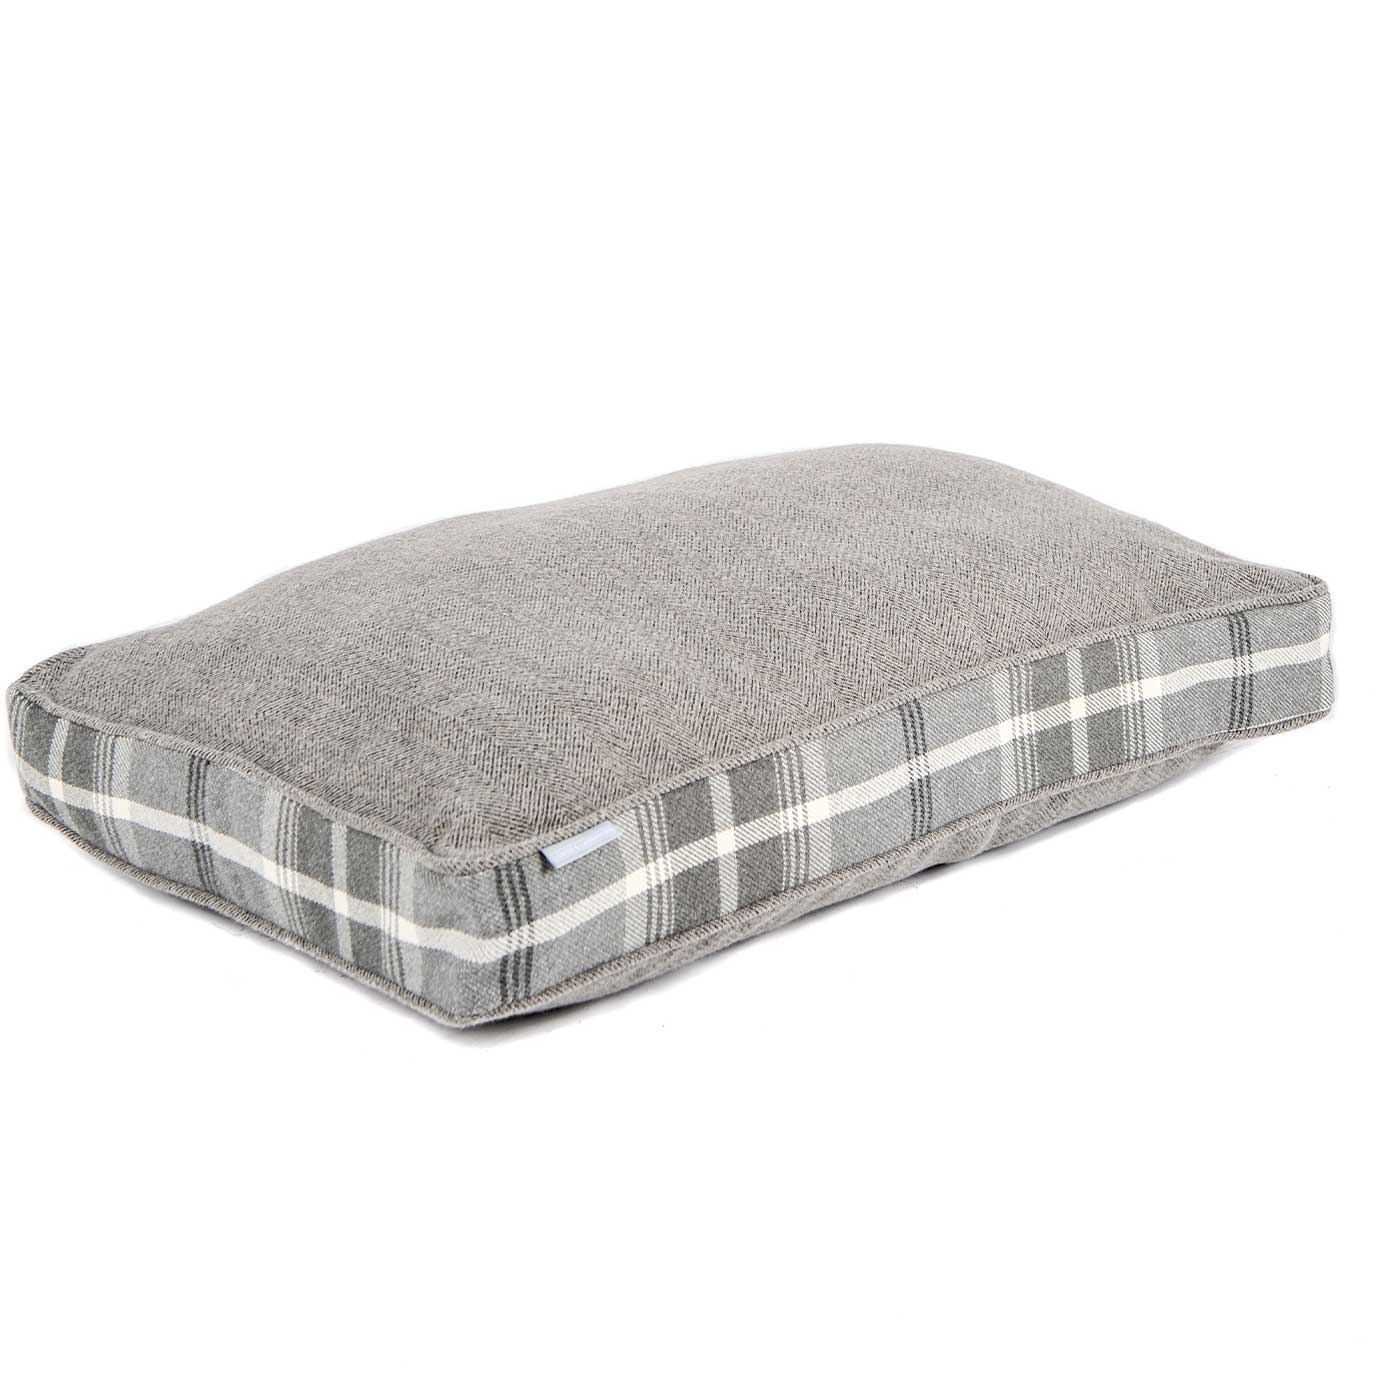 Luxury Dog Cage Cushion, Balmoral Dove Grey Tweed Cage Cushion. The Perfect Dog Cage Accessory, Available To Personalize Now at Lords & Labradors US